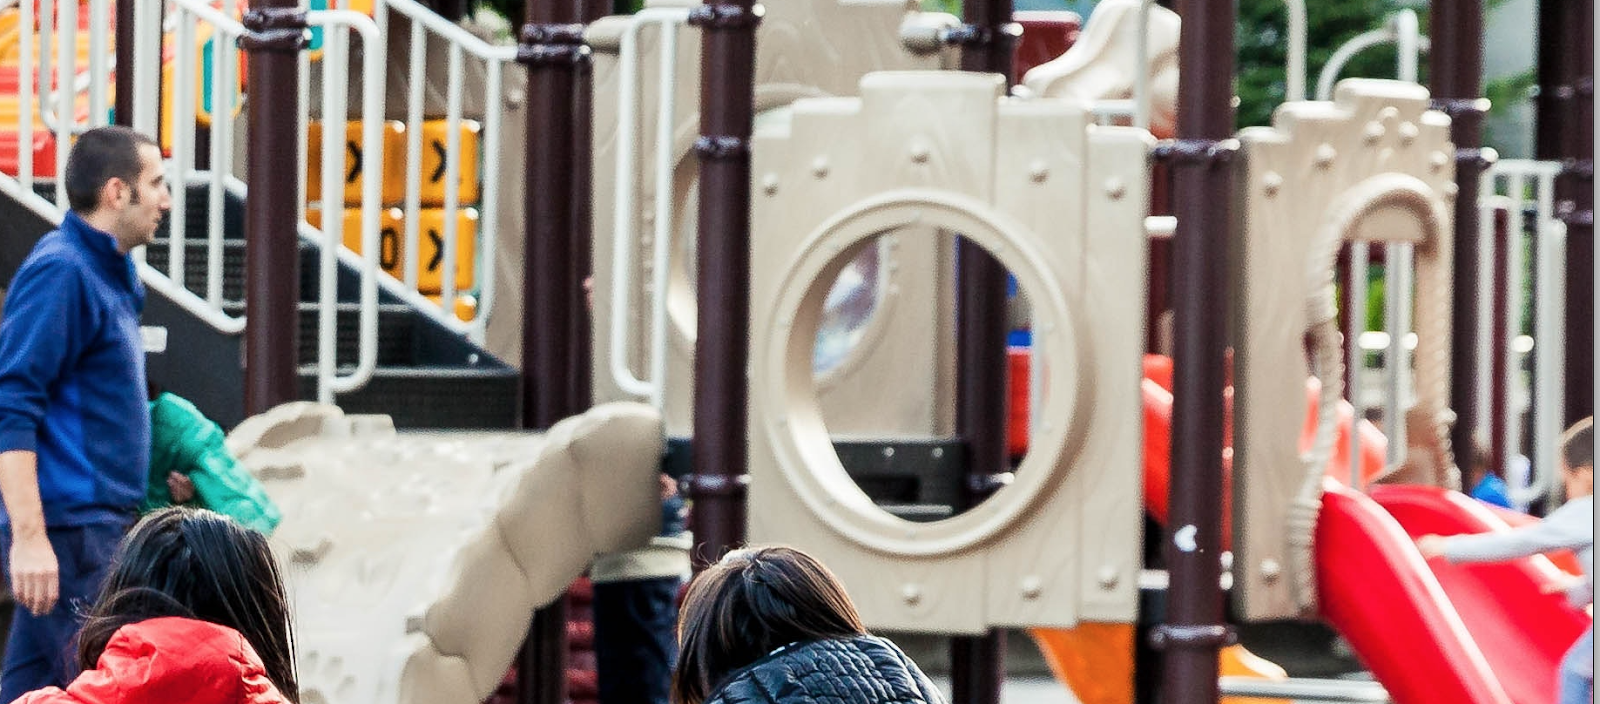 Follow this useful guide to learn how to clean and maintain your playground equipment